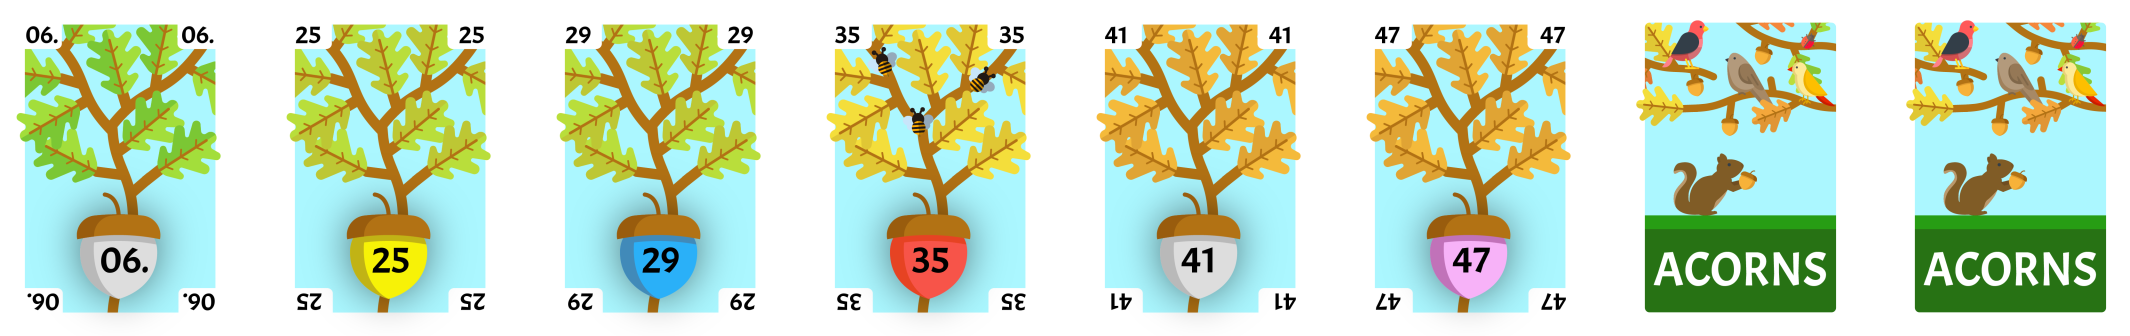 47 swapping positions with left-most card.